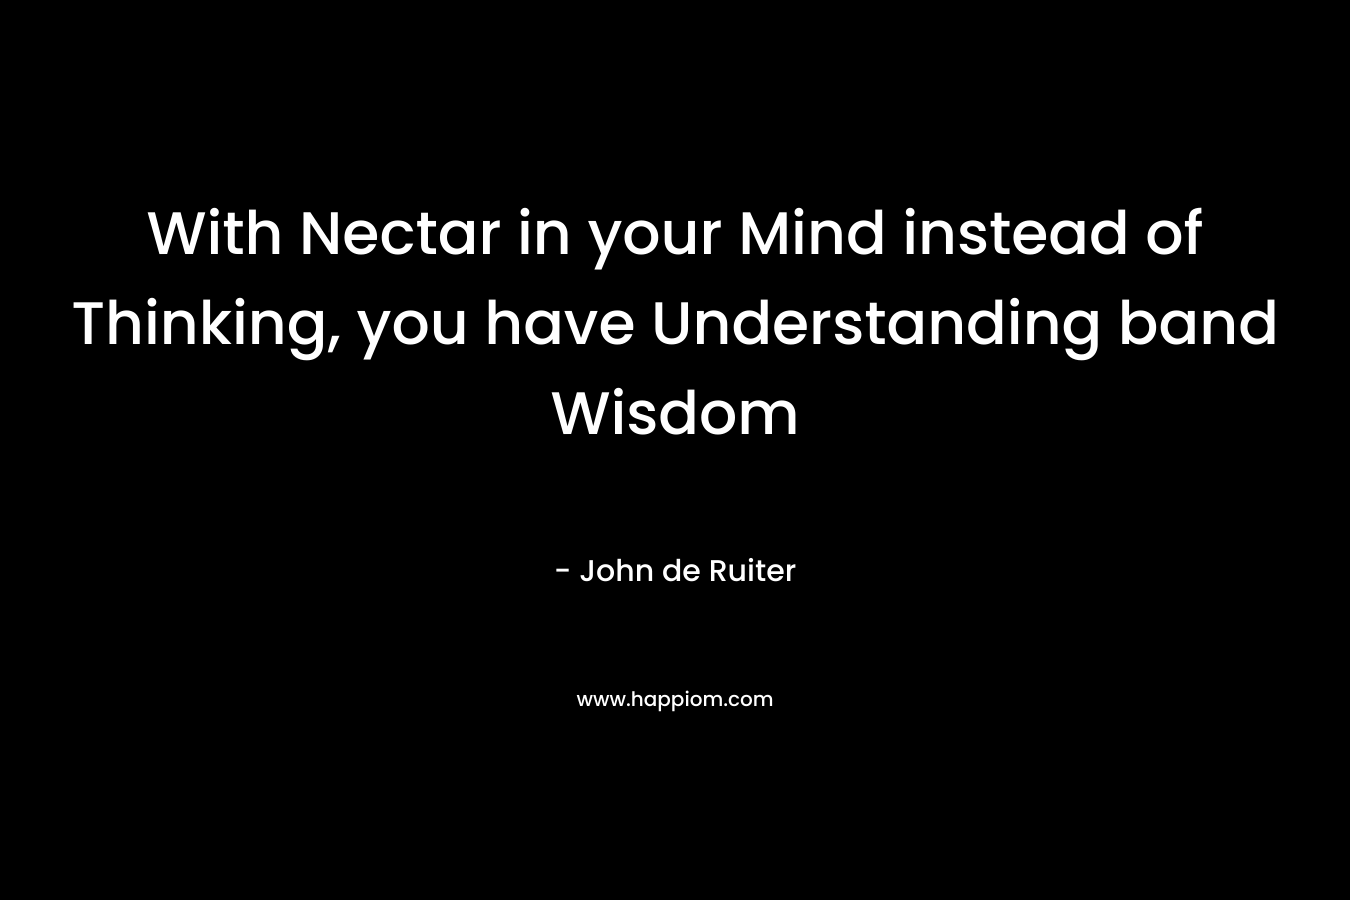 With Nectar in your Mind instead of Thinking, you have Understanding band Wisdom